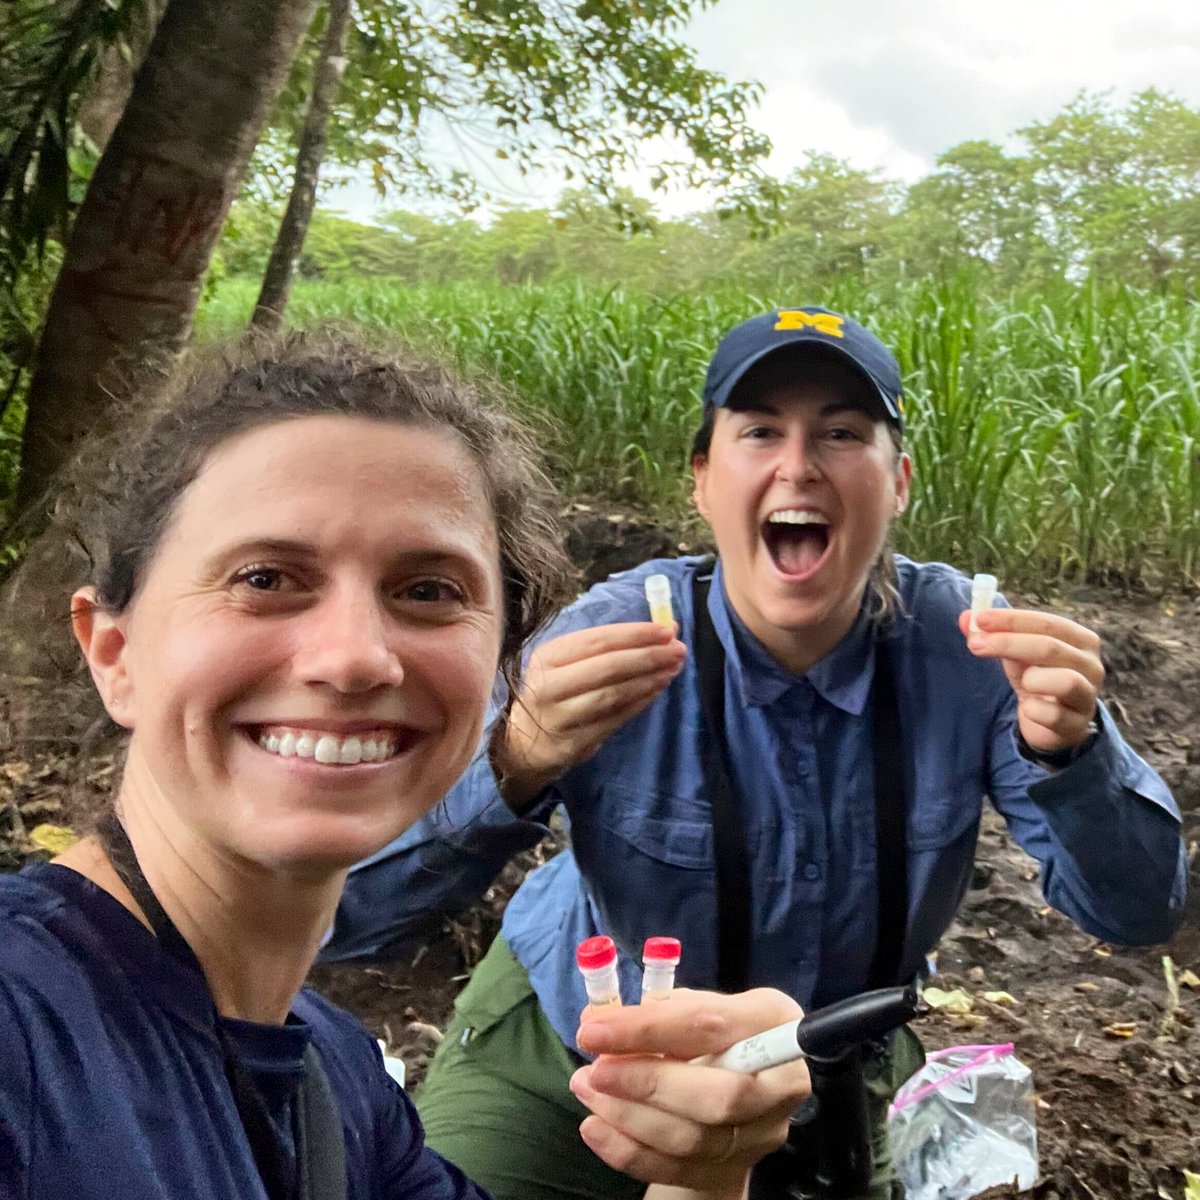 Sure science is fun but have you ever collected pee from an arboreal monkey after an intergroup encounter? @Sarah_Kovo @JordanLucore #fieldworkfun #gradschool